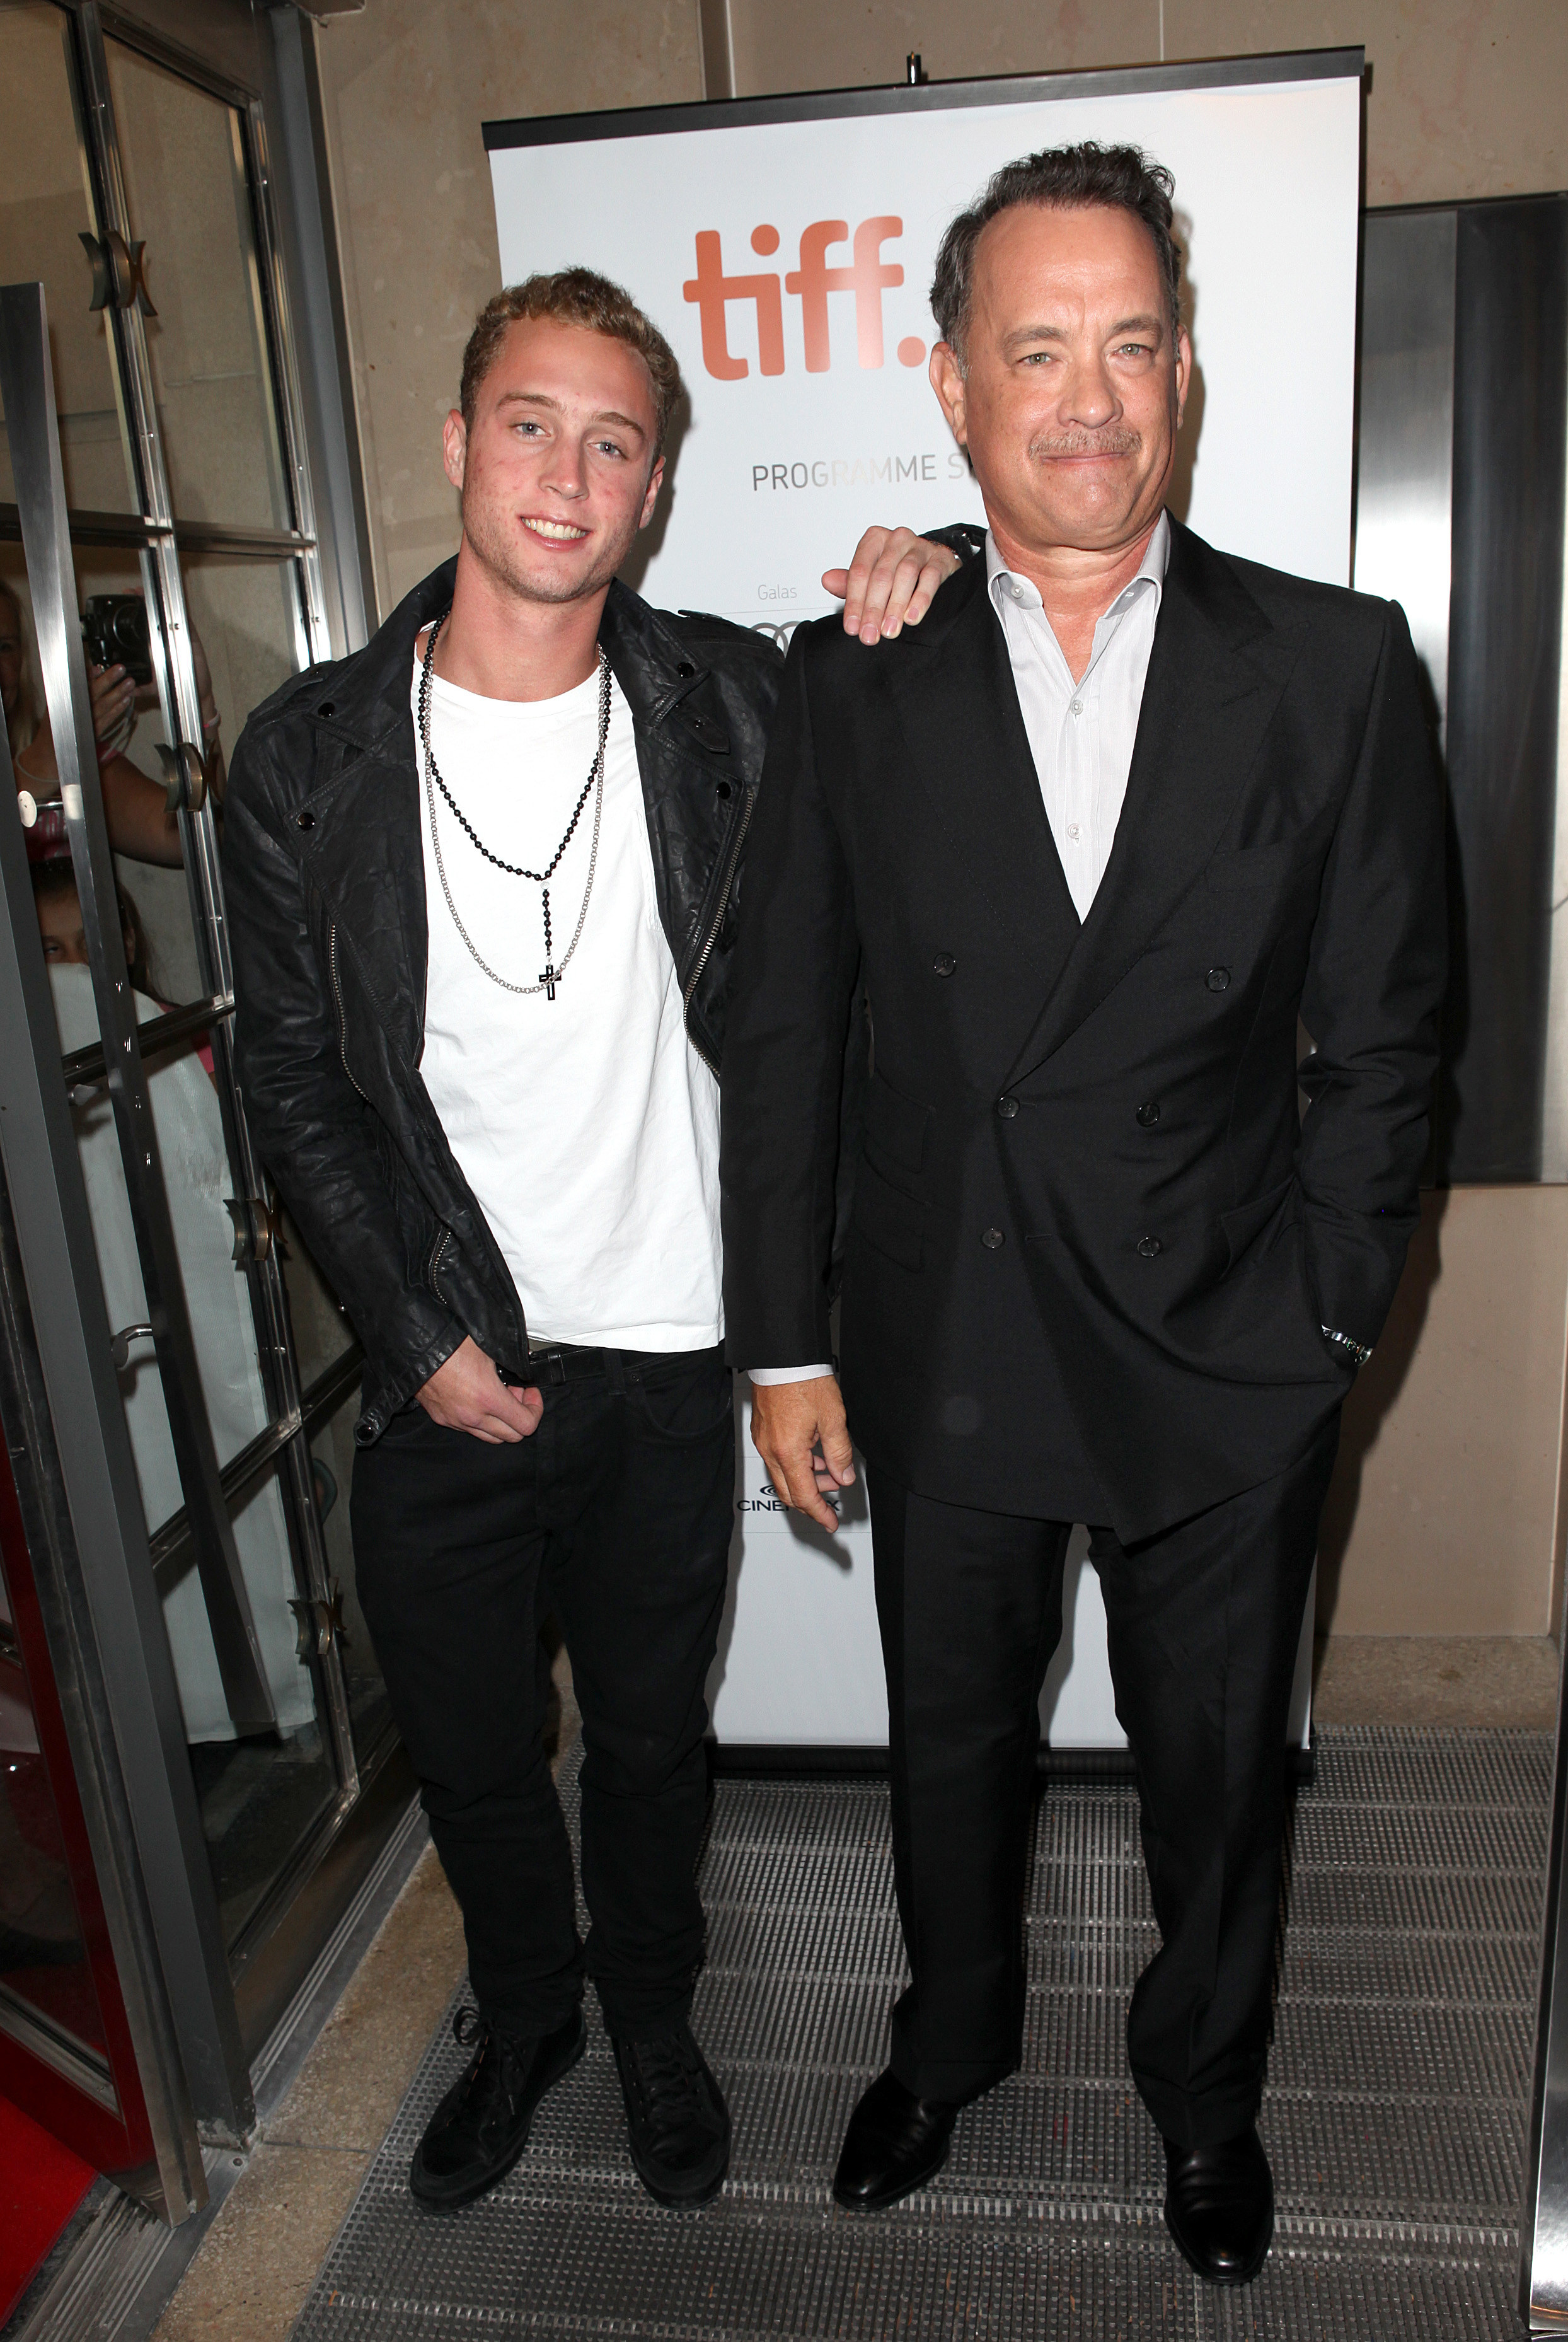 Chet Hanks and Tom Hanks are photographed together at the Toronto International Film Festival in 2012